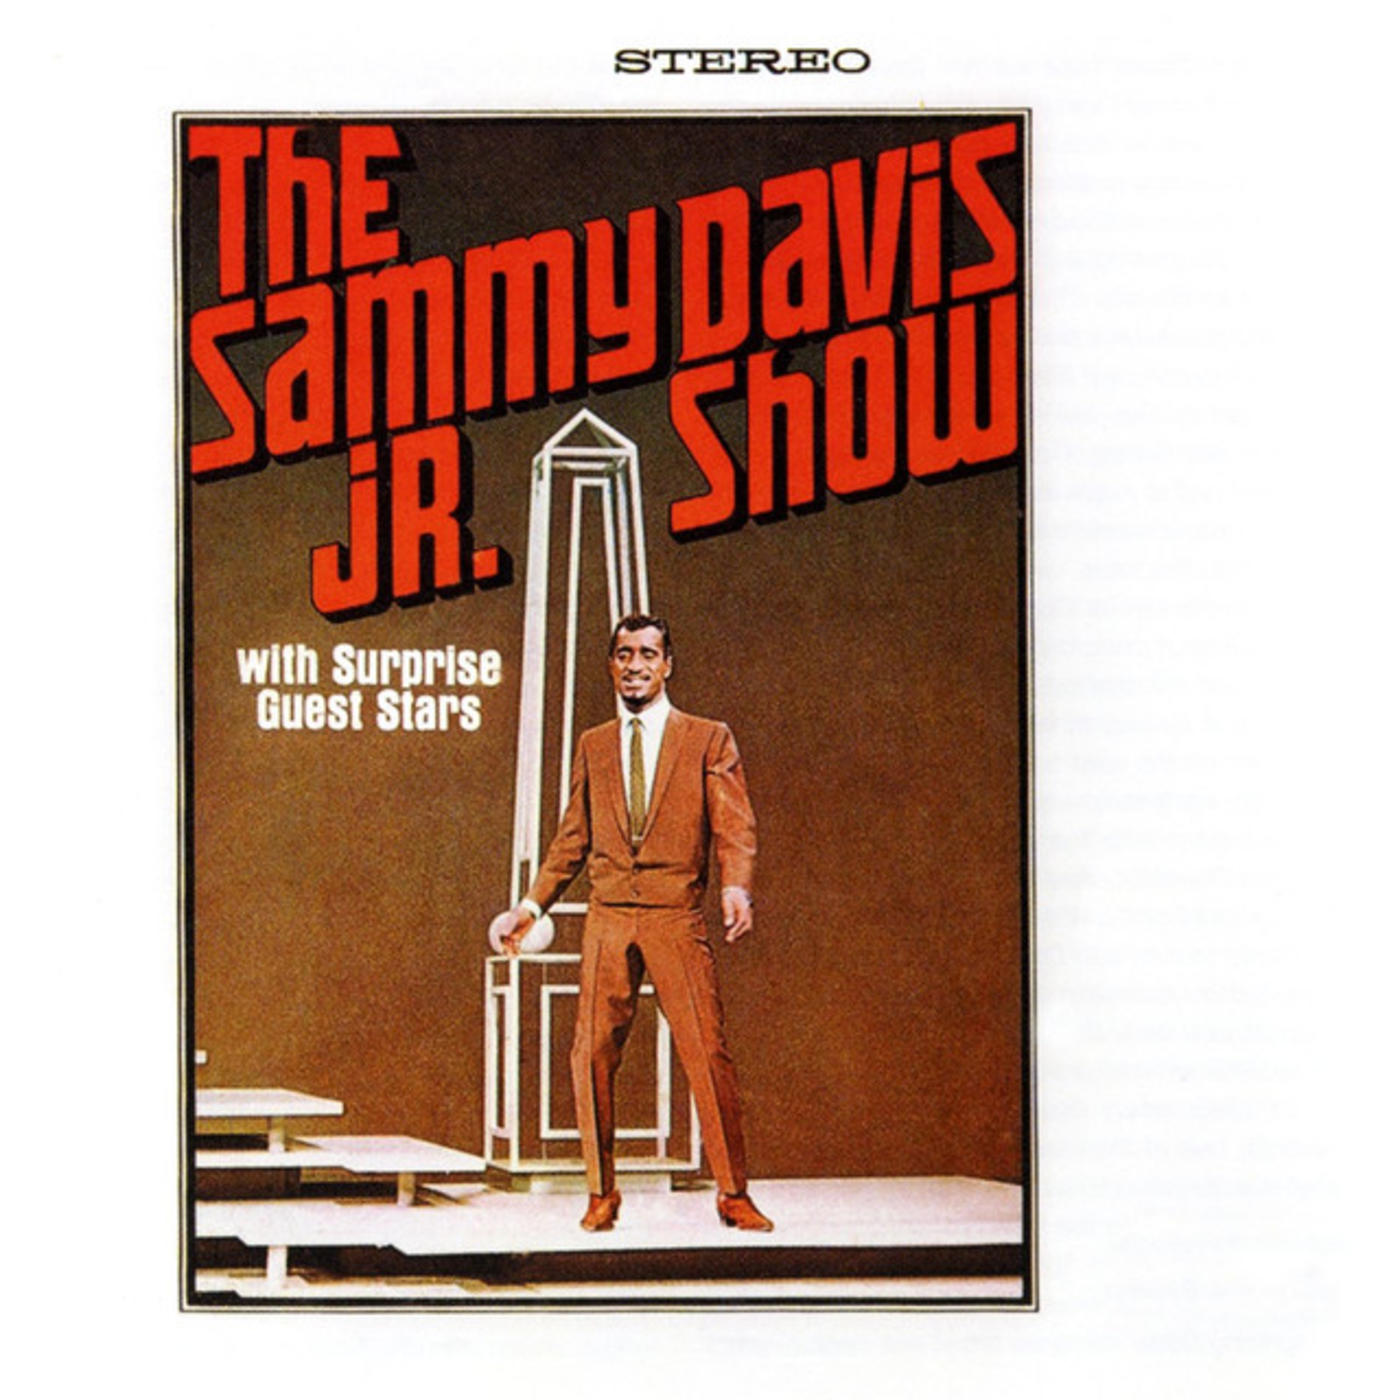 The Sammy Davis Jr. Show with Special Guests Stars Frank Sinatra and Dean Martin